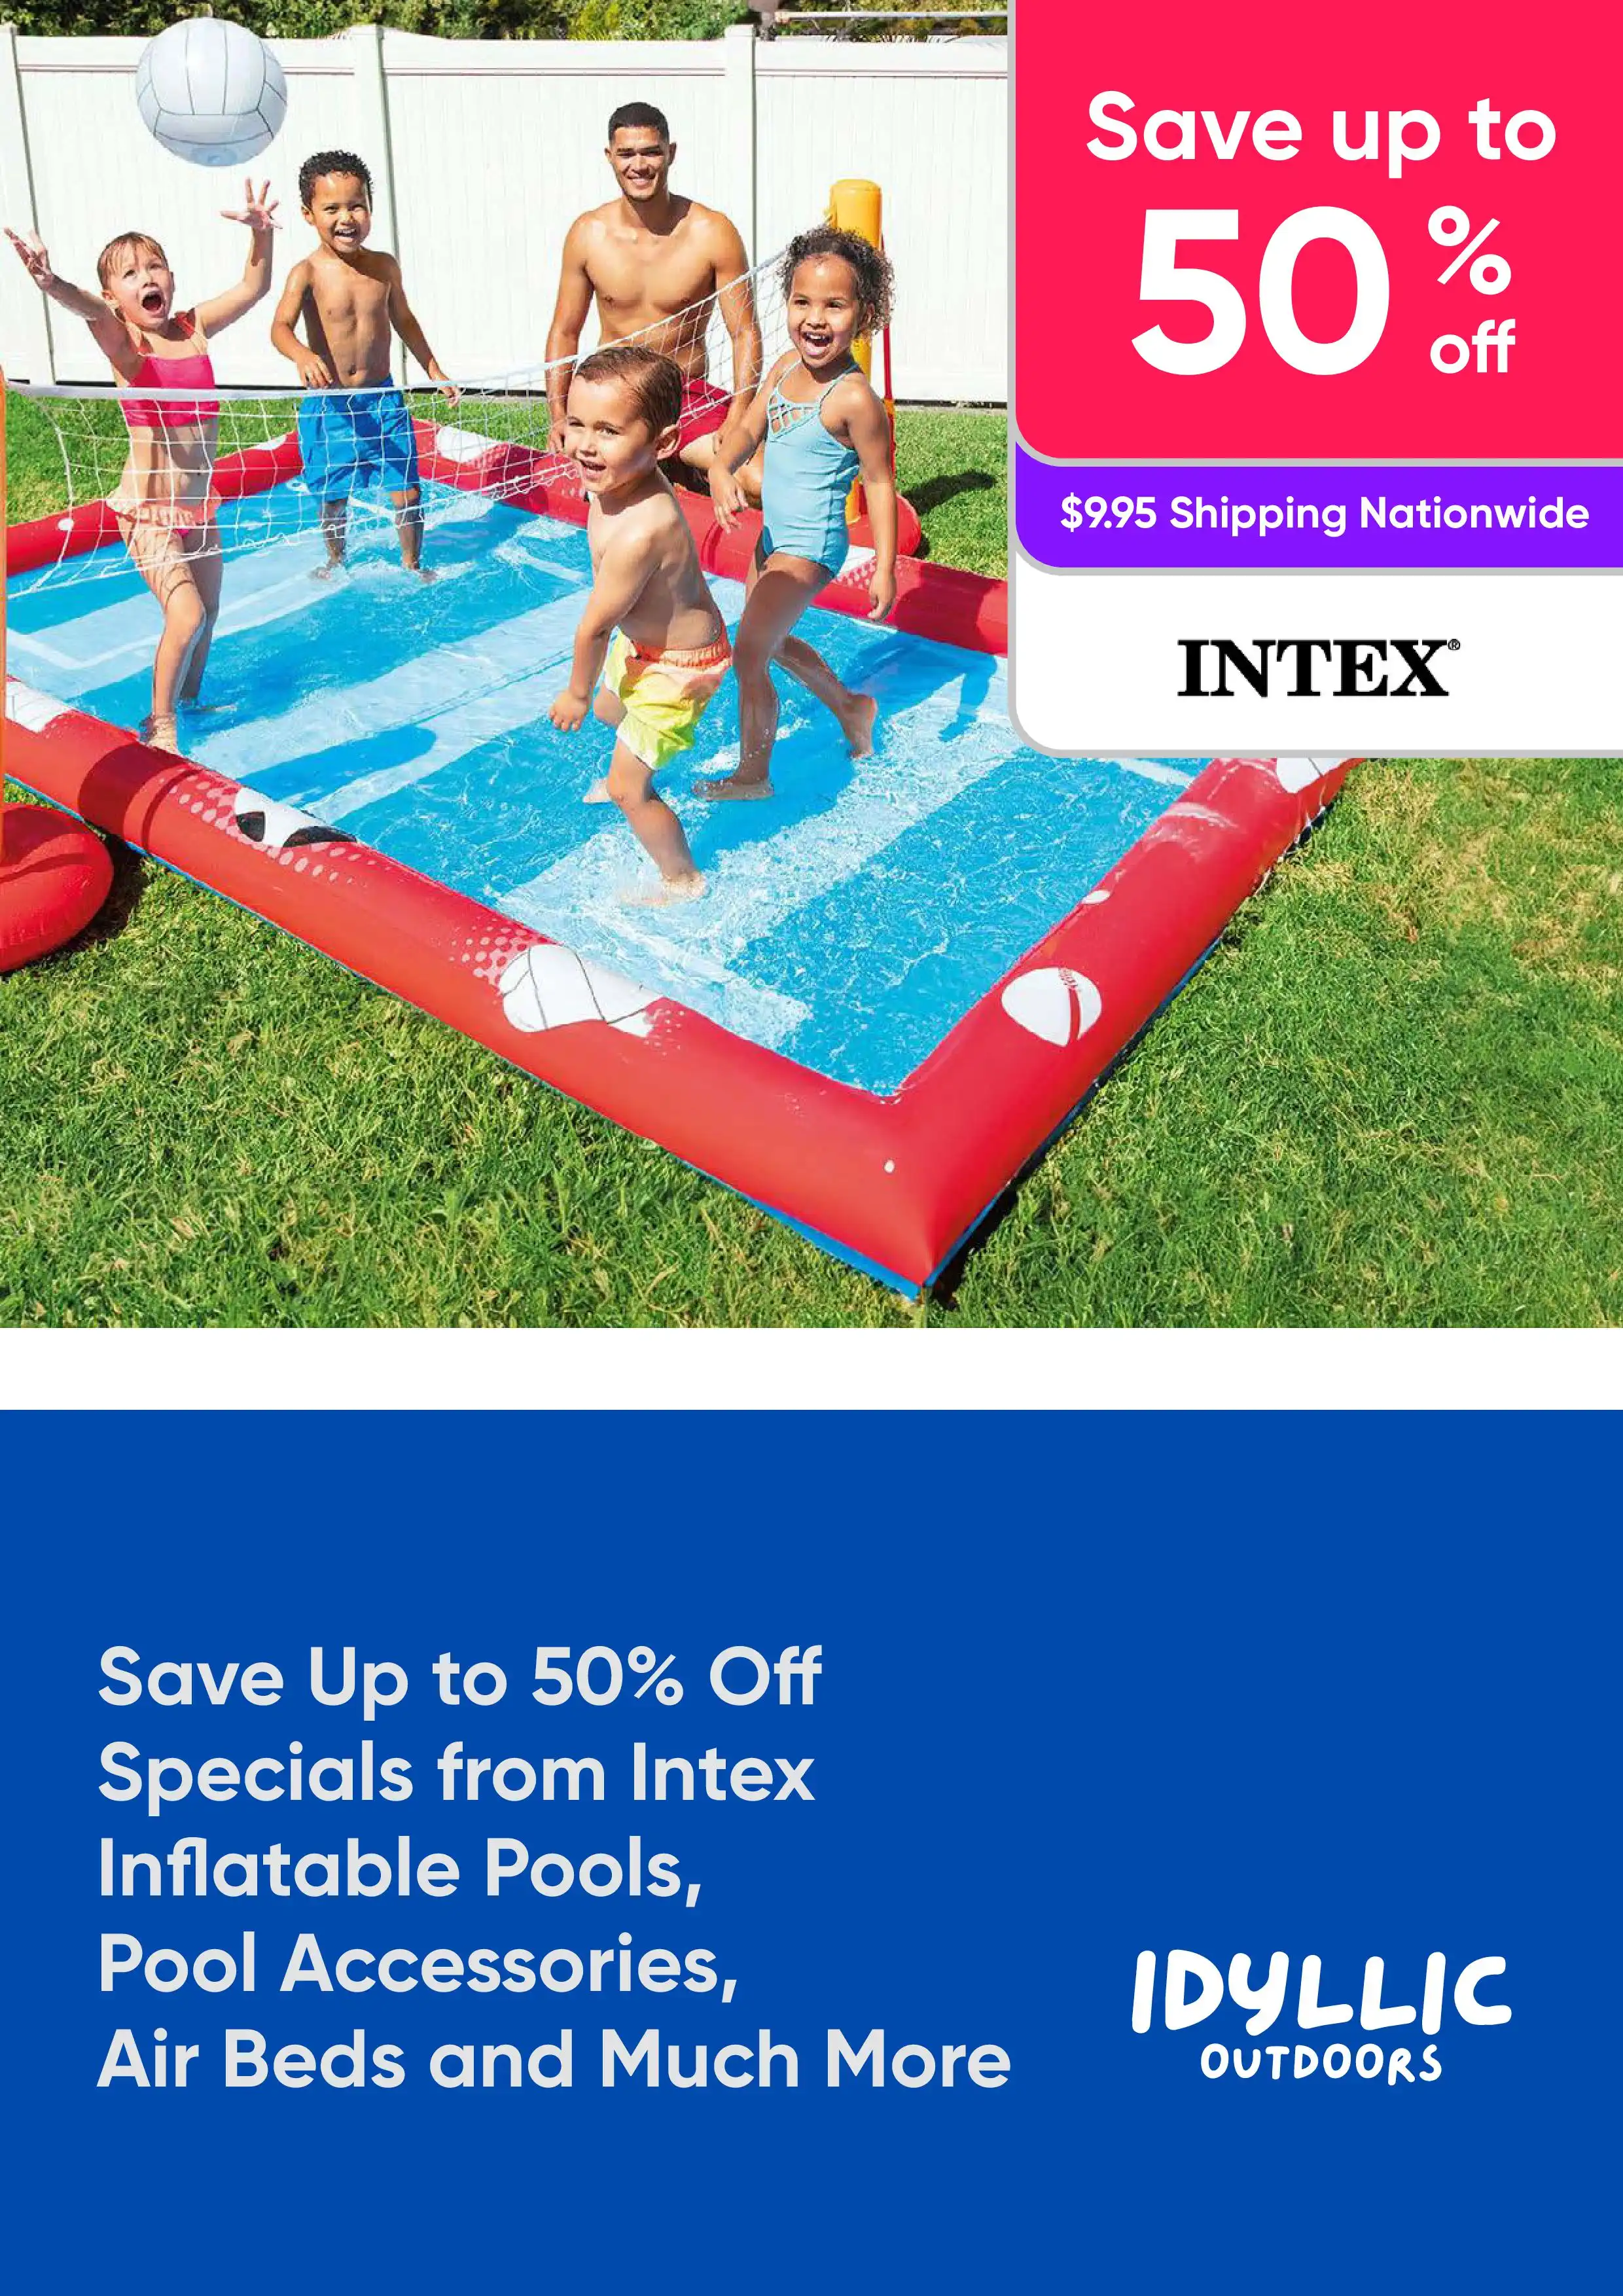 Save Up to 50% Off Specials from Intex Inflatable Pools, Pool Accessories, Air Beds and Much More